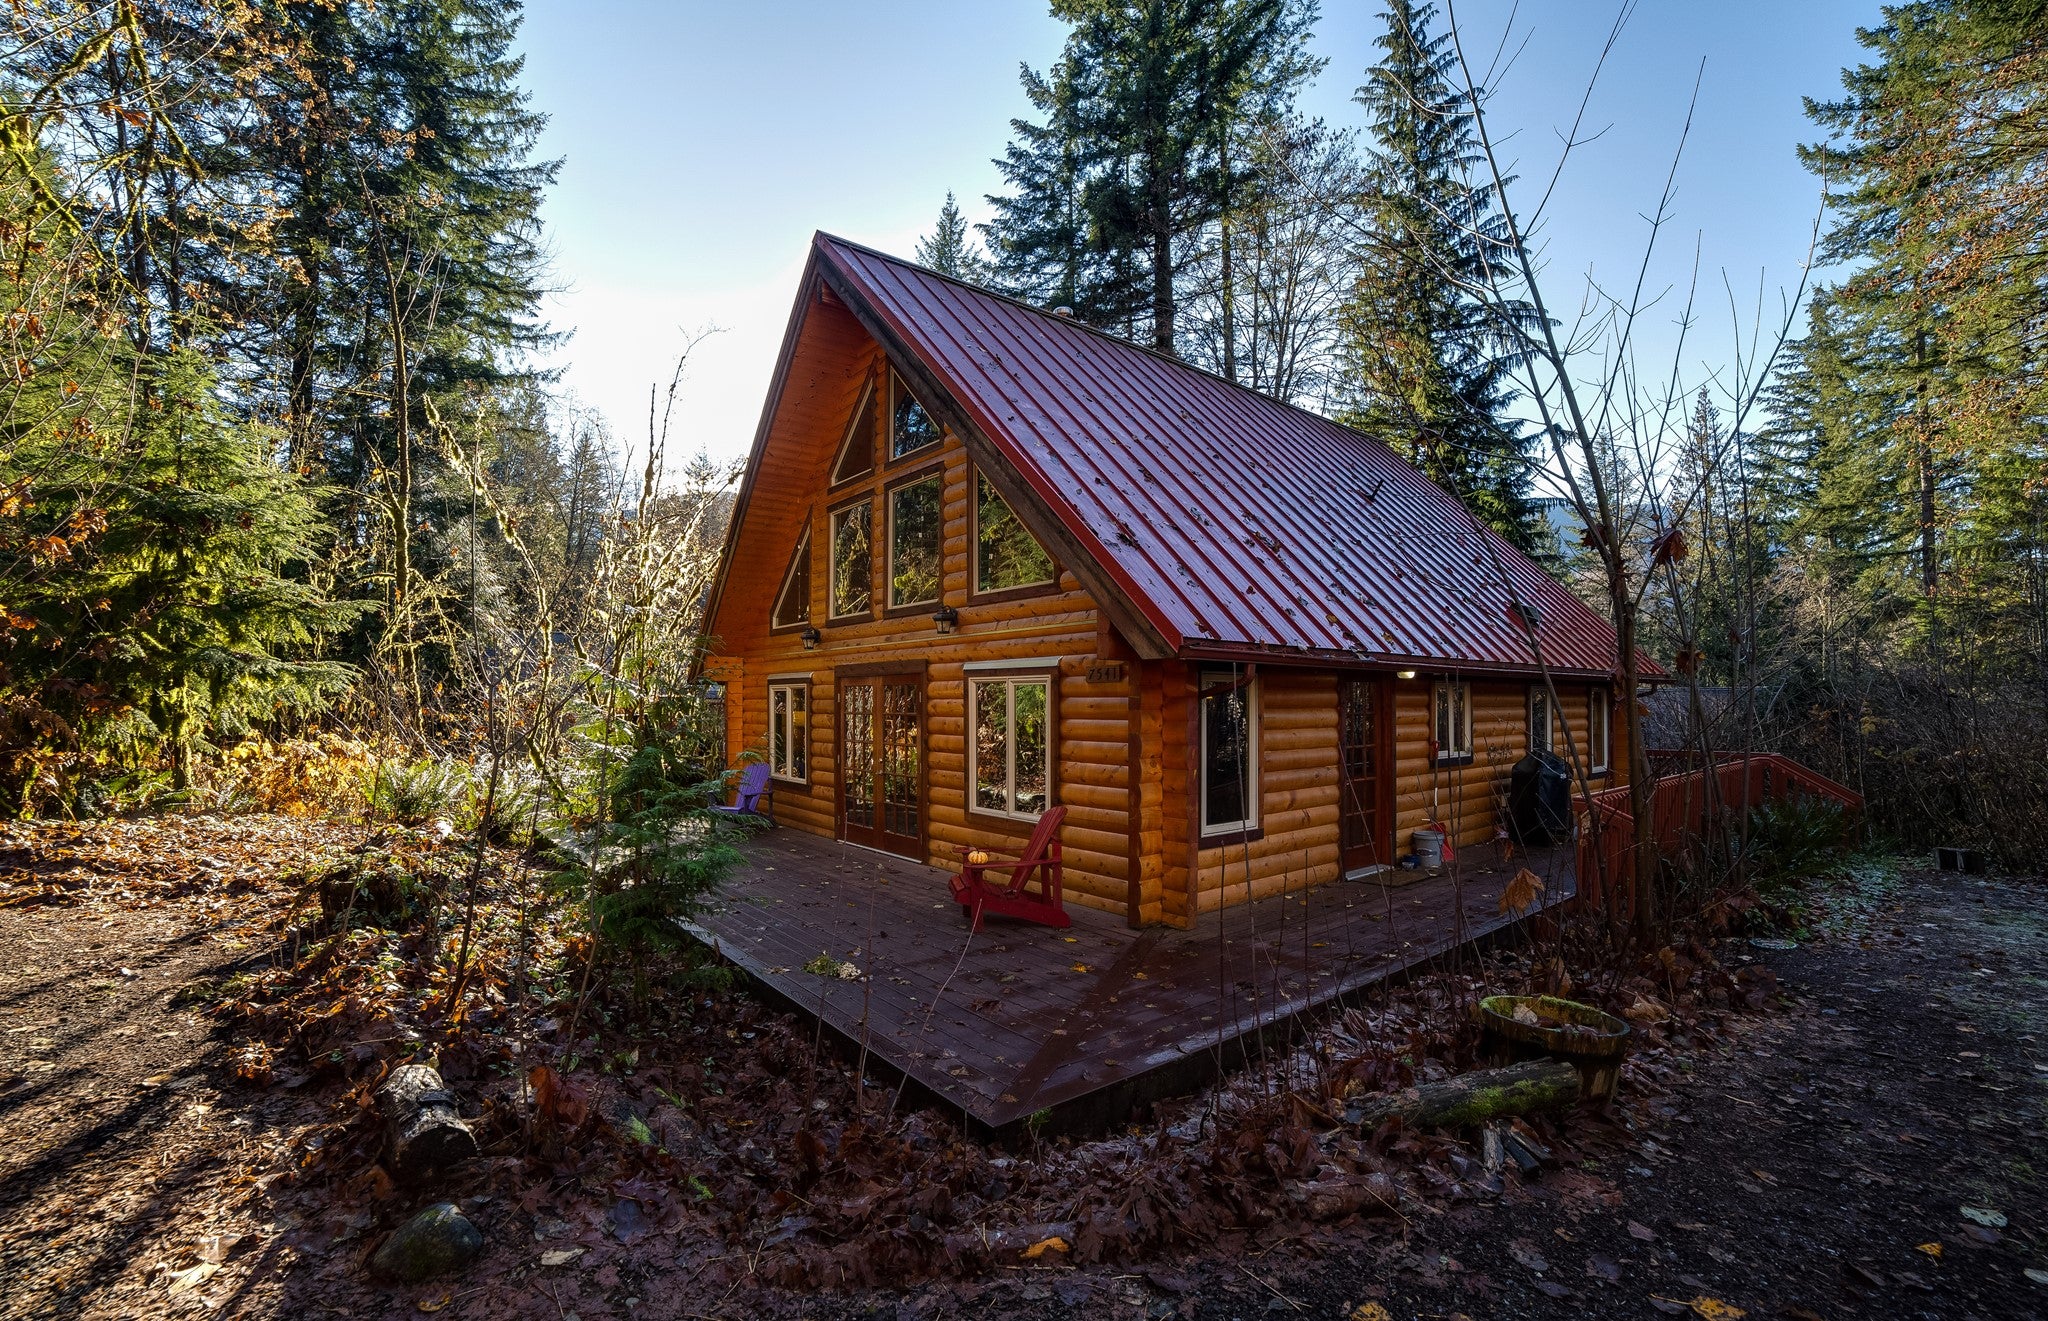 Camper submitted image from Mt. Baker Lodging - Cabin #21 - Wood Stove, W/D, PETS OK, SLEEPS-6 - 4